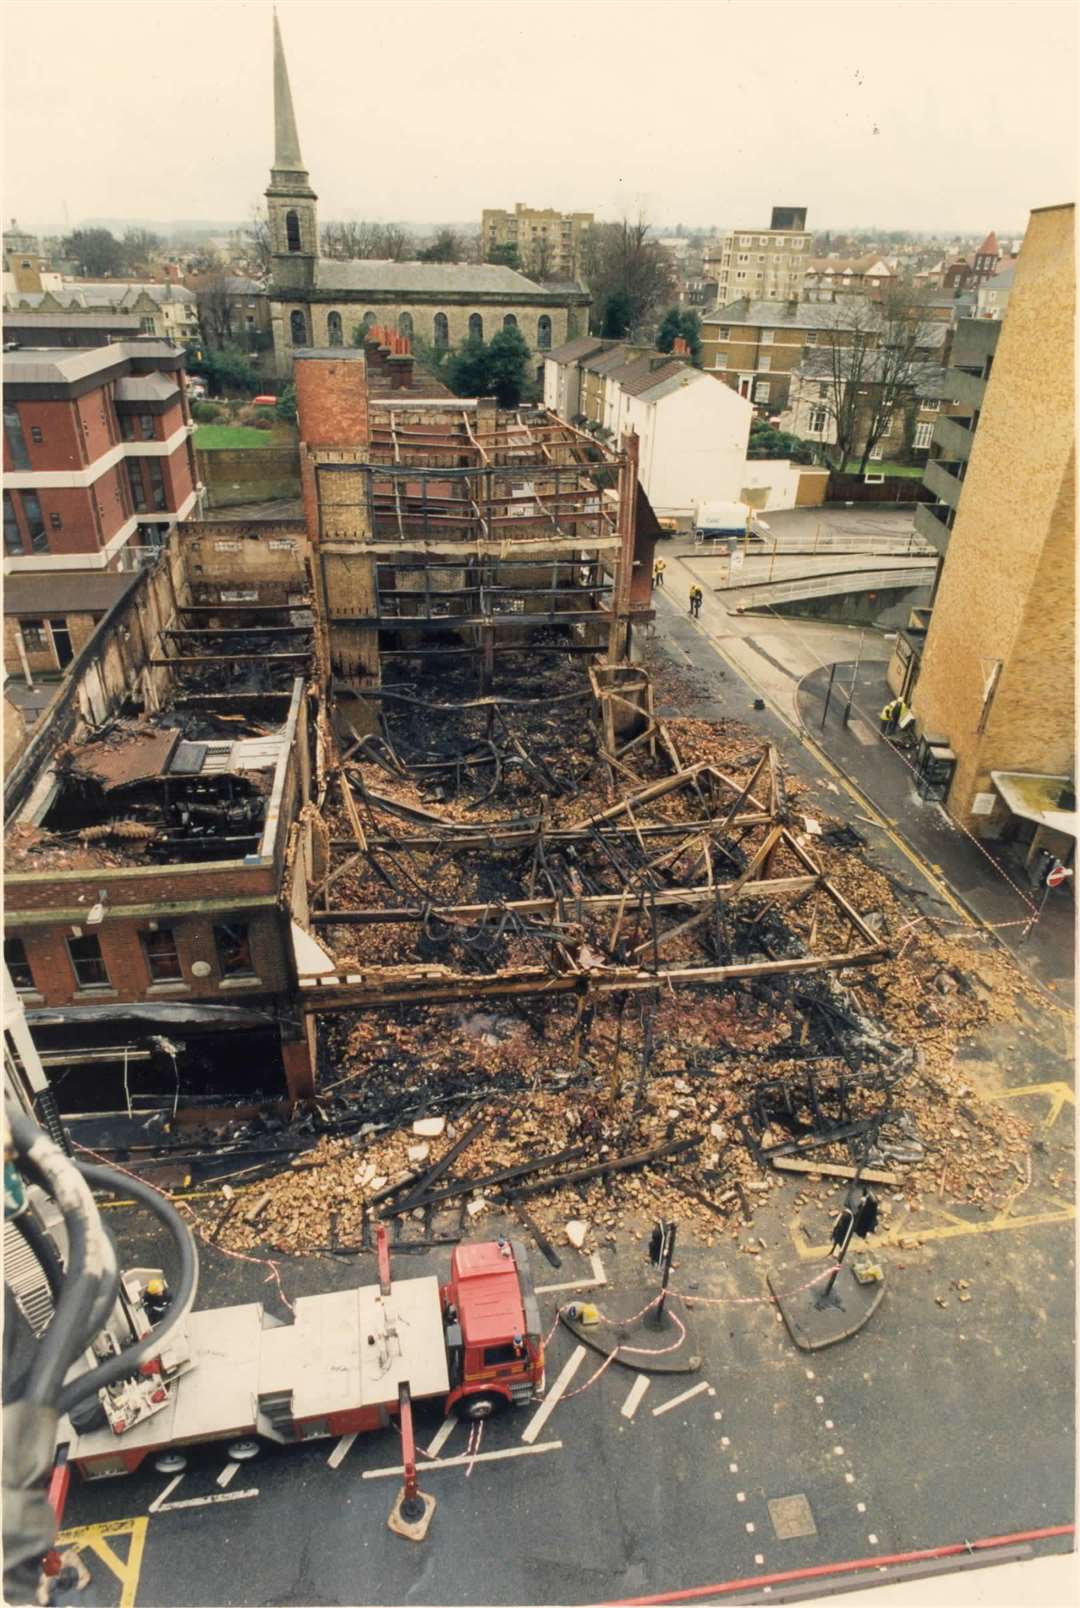 All that was left of Clarke's original store in King Street after the 1995 fire